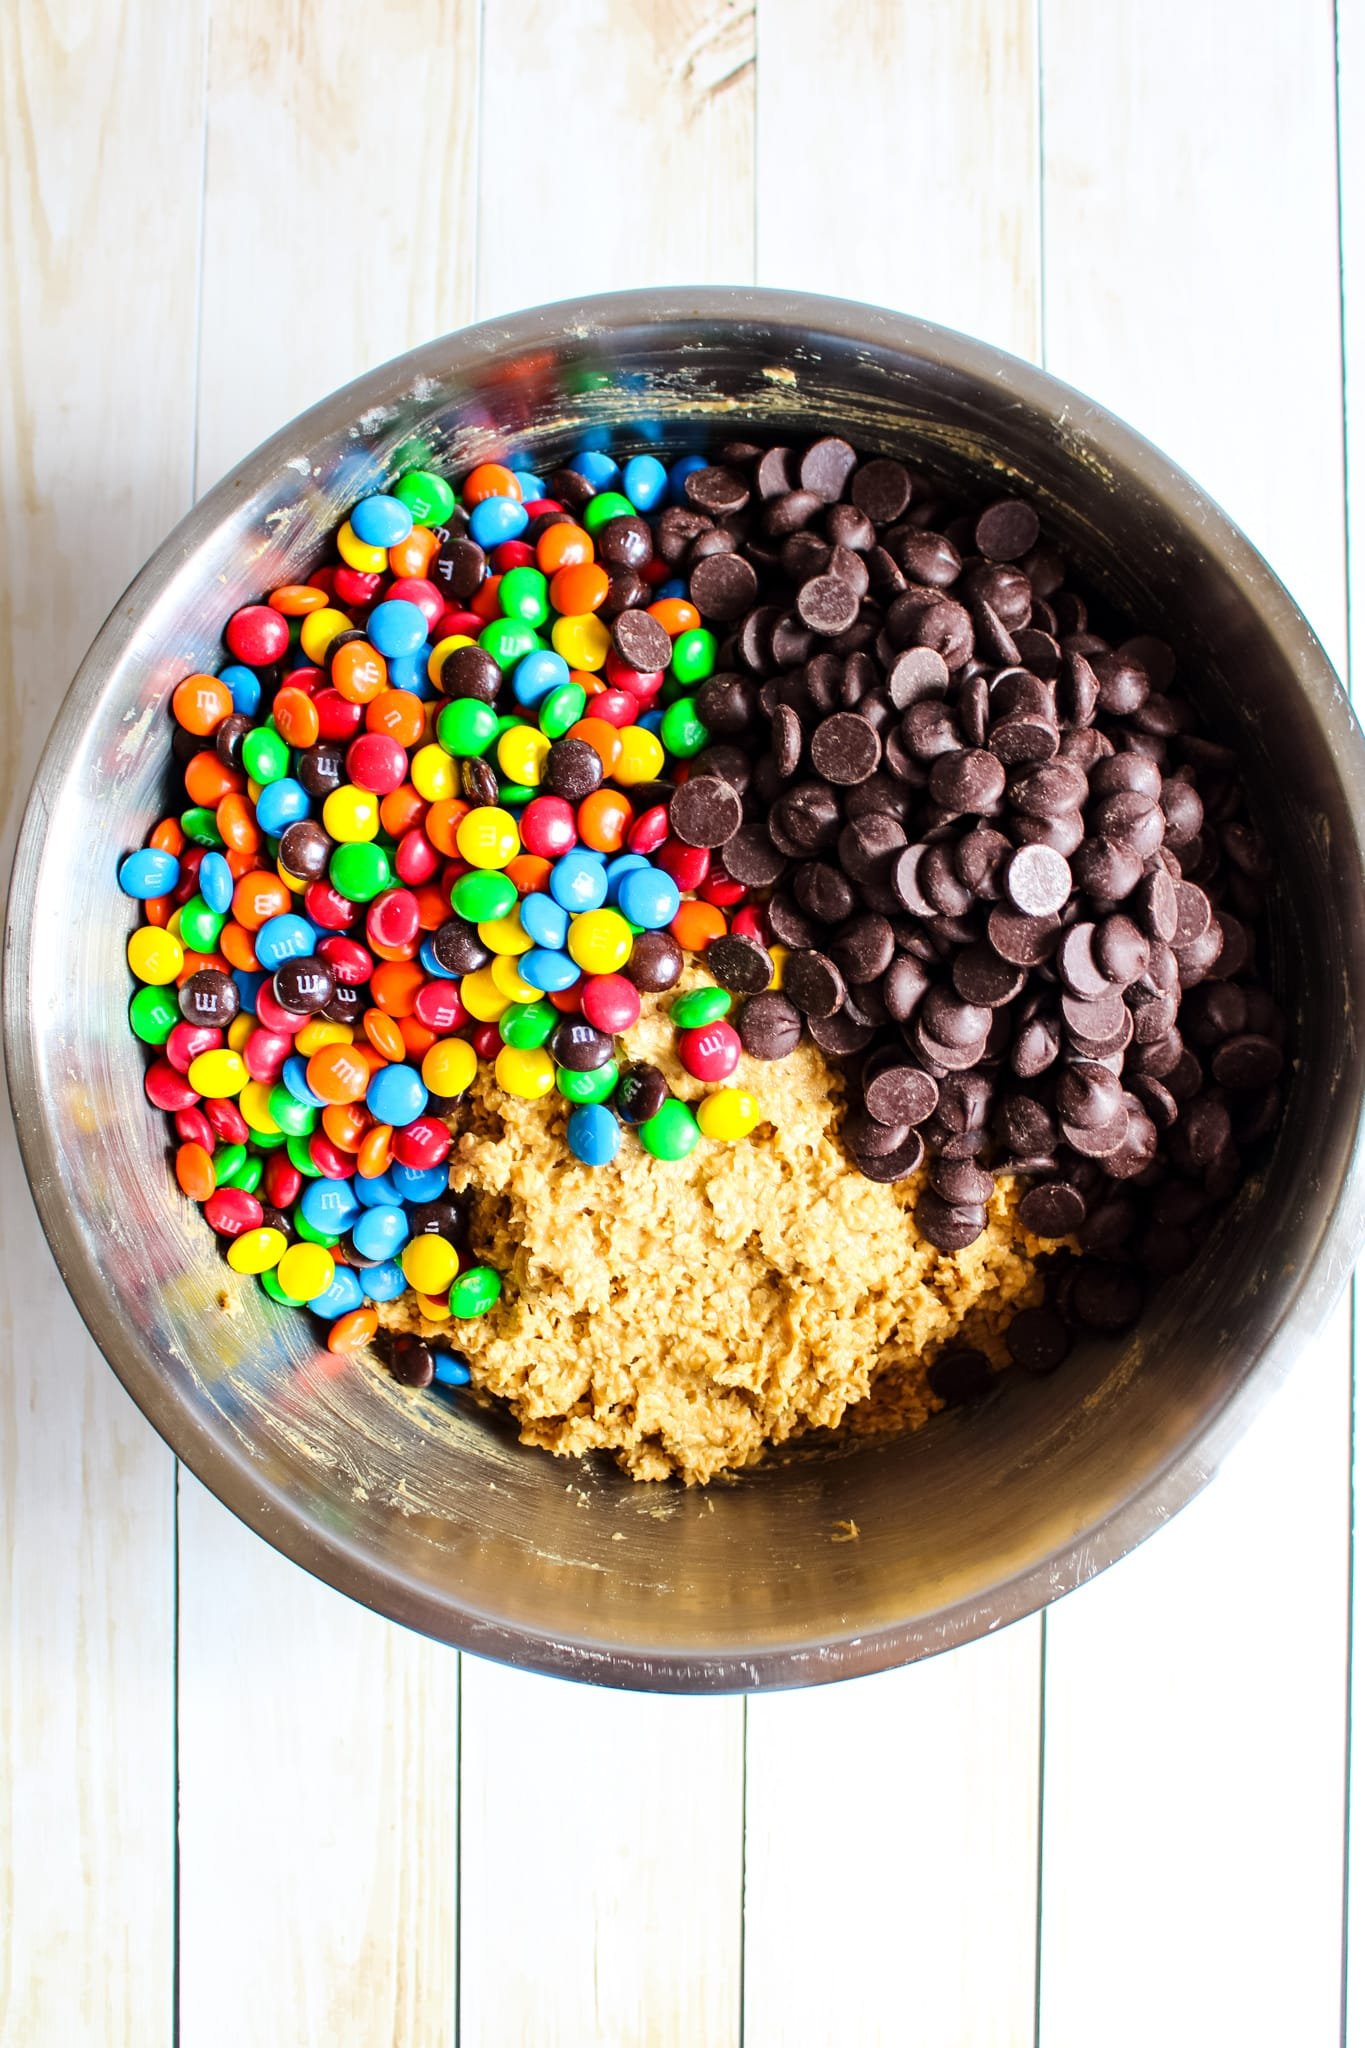 Monster cookie recipe of cookie dough in bowl with m&m's and chocolate chips on top.